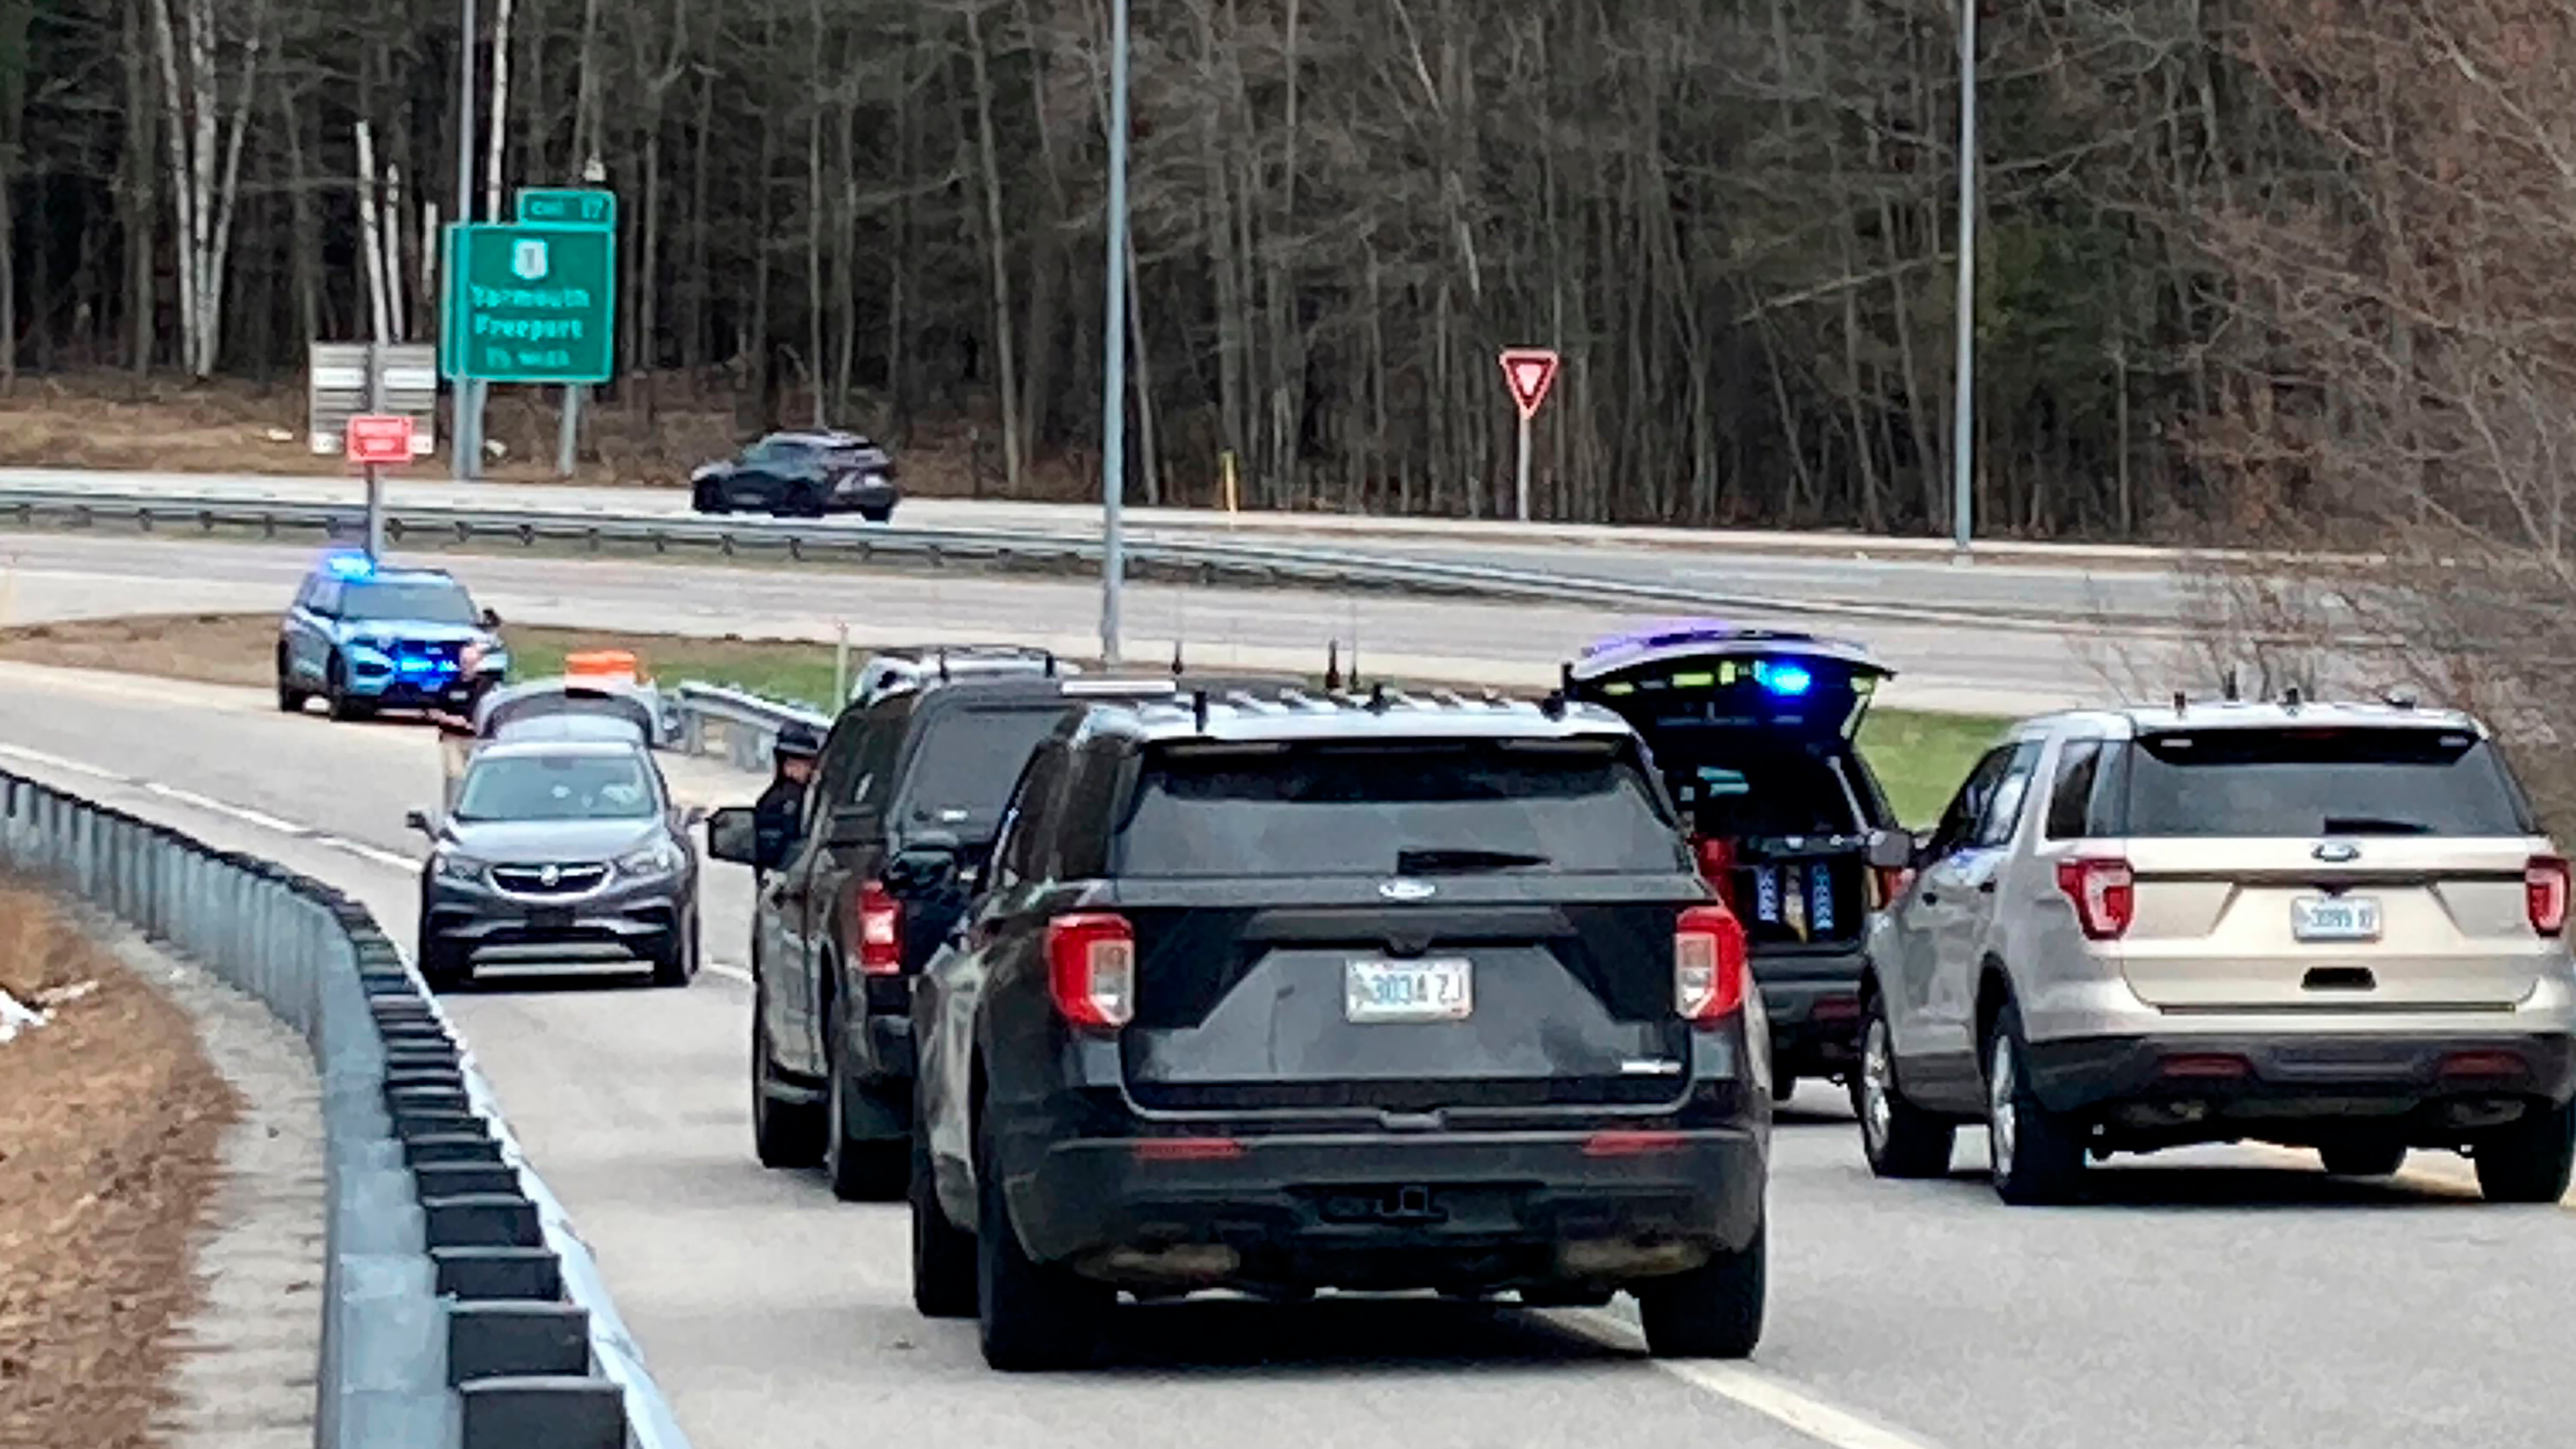 Vehicles are stopped on a highway at a scene where people were injured in a shooting on Interstate 295 in Yarmouth, Maine, Tuesday, April 18, 2023